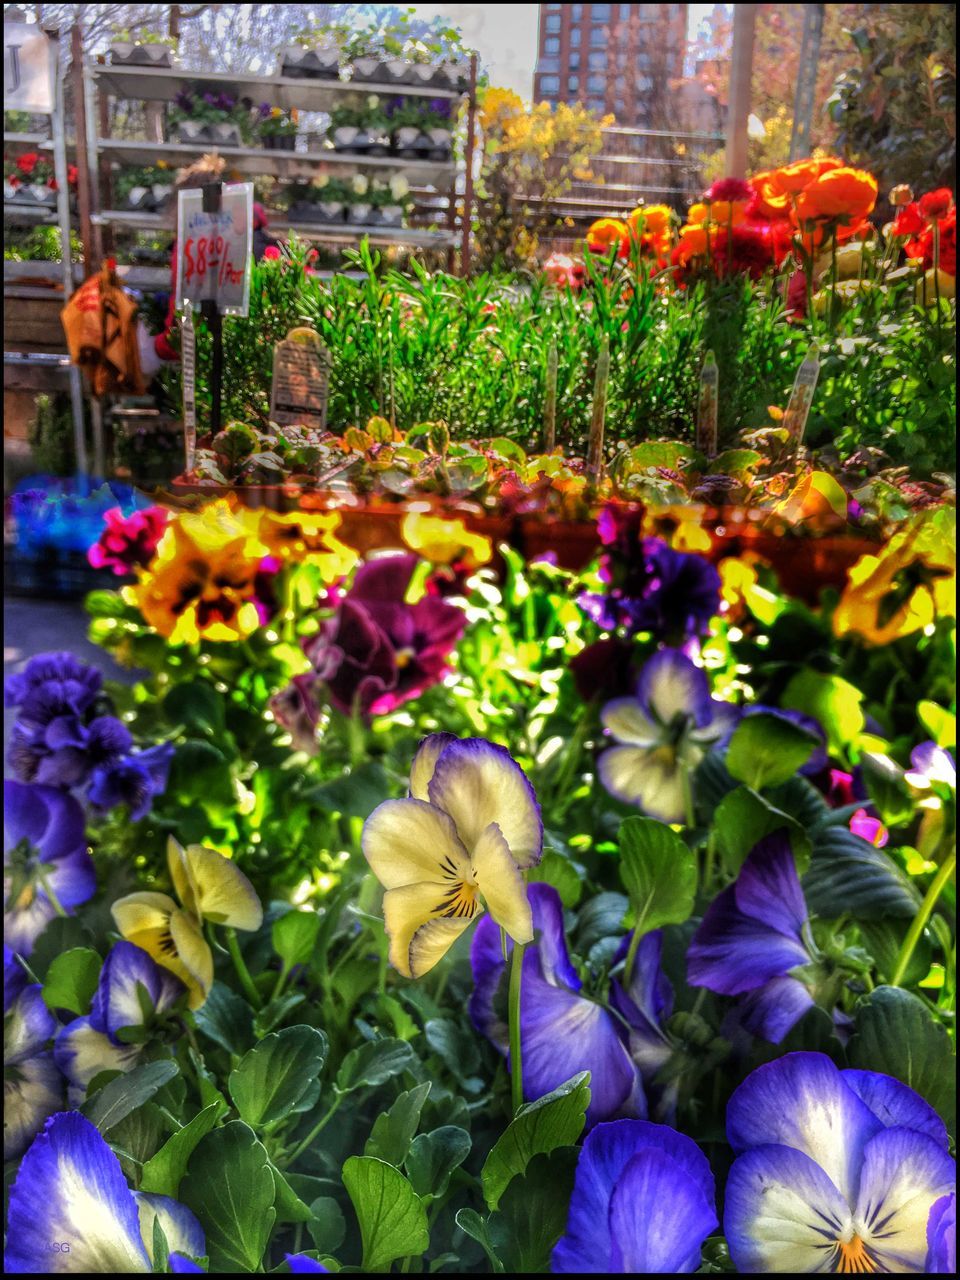 flower, freshness, fragility, growth, abundance, plant, multi colored, beauty in nature, variation, purple, petal, nature, blooming, field, flower head, flowerbed, for sale, tulip, park - man made space, day